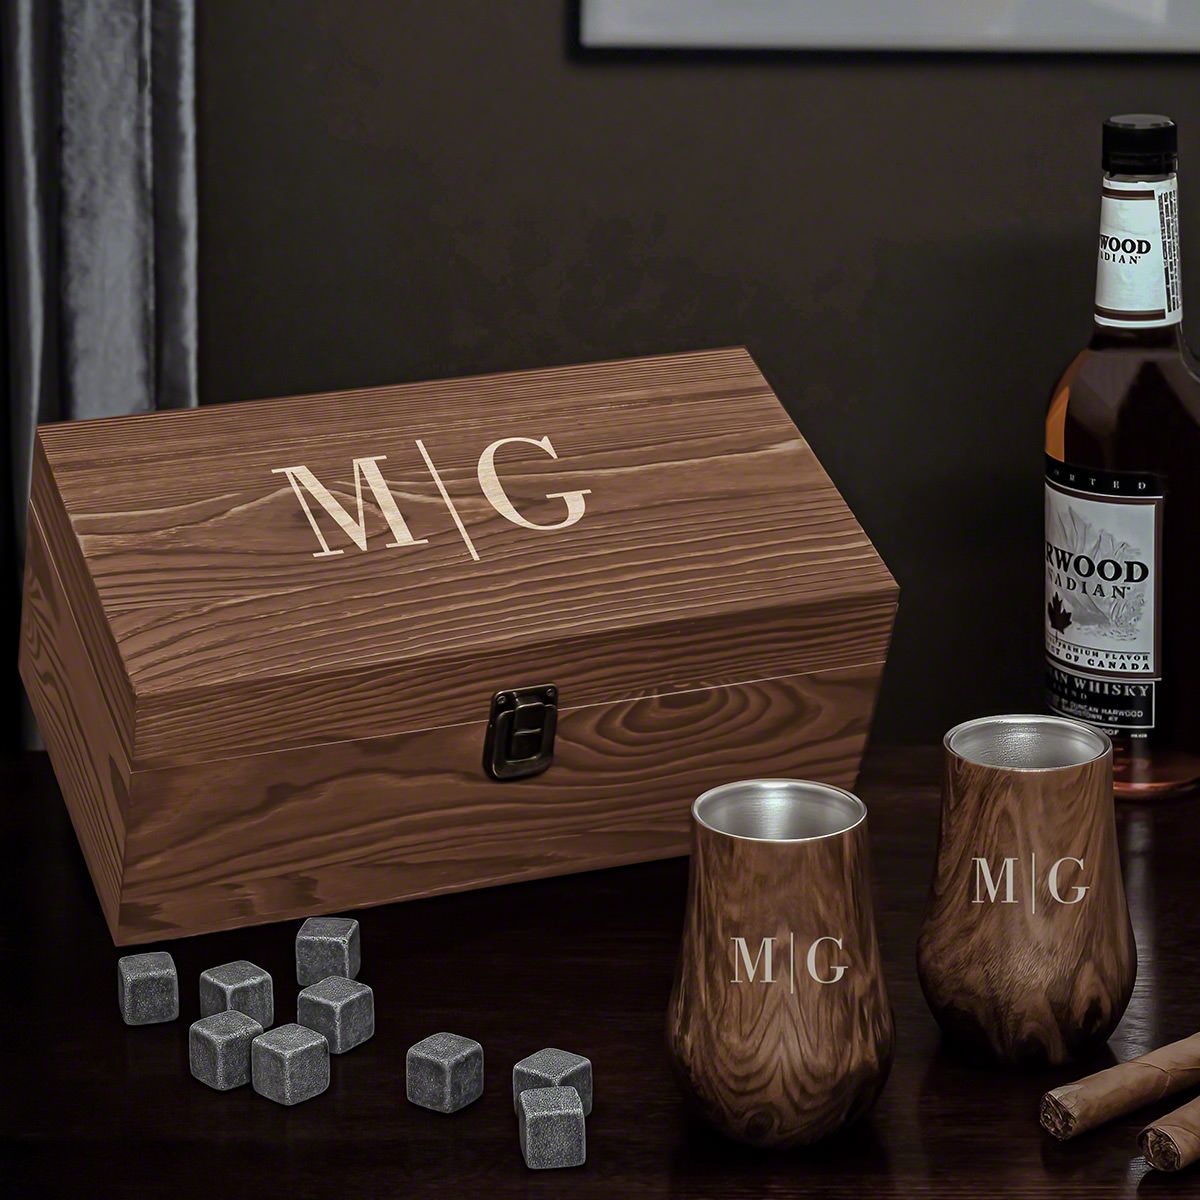 Wood Grain Neat Whiskey Box Set Engraved with Quinton